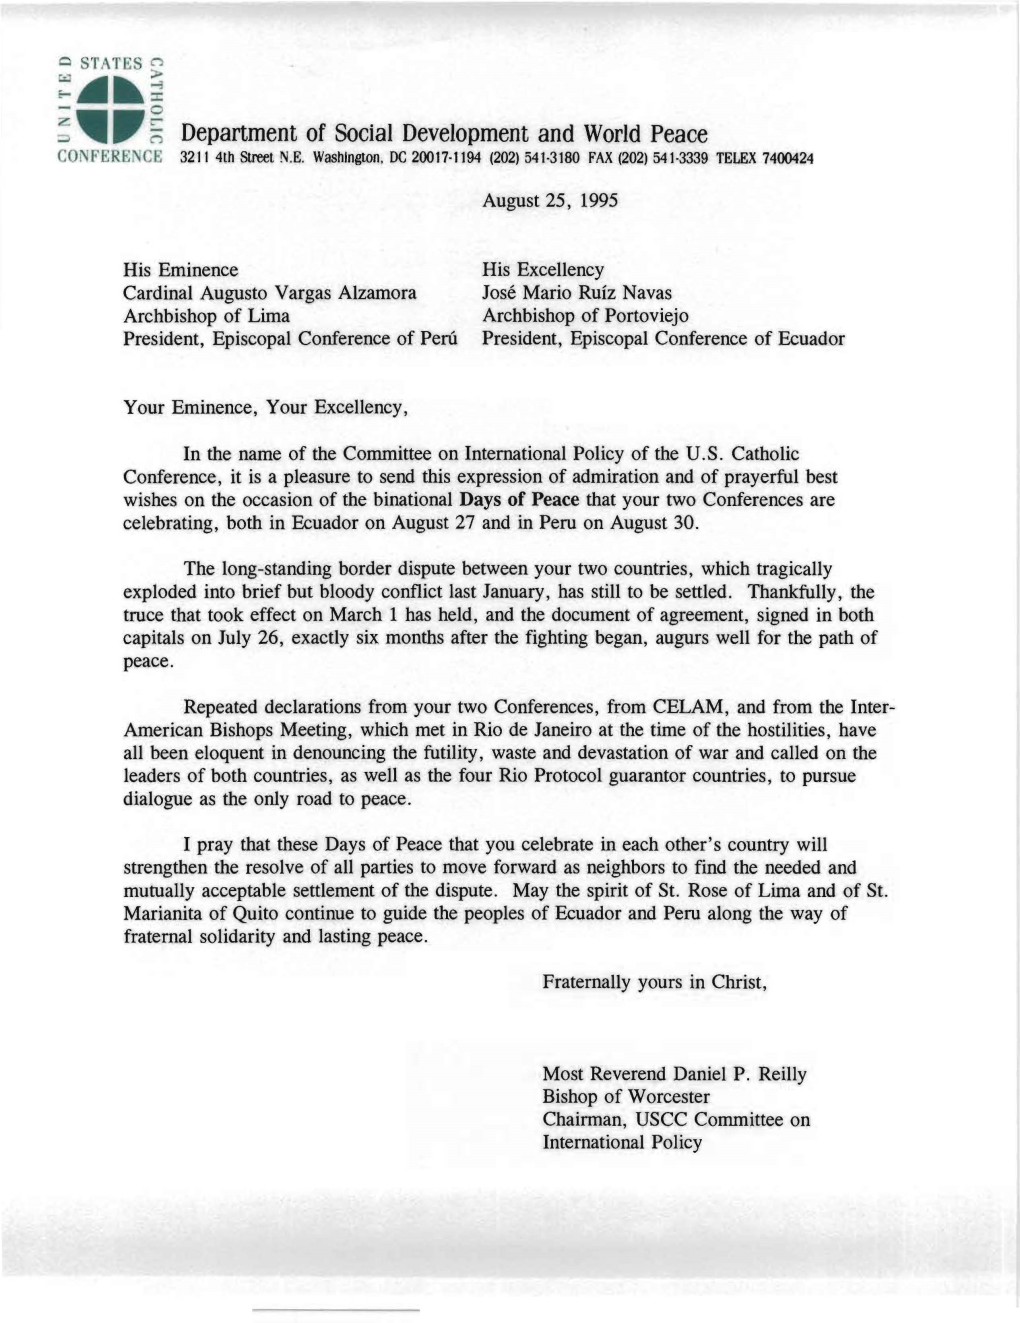 Letter on Days of Peace Between Ecuador and Peru